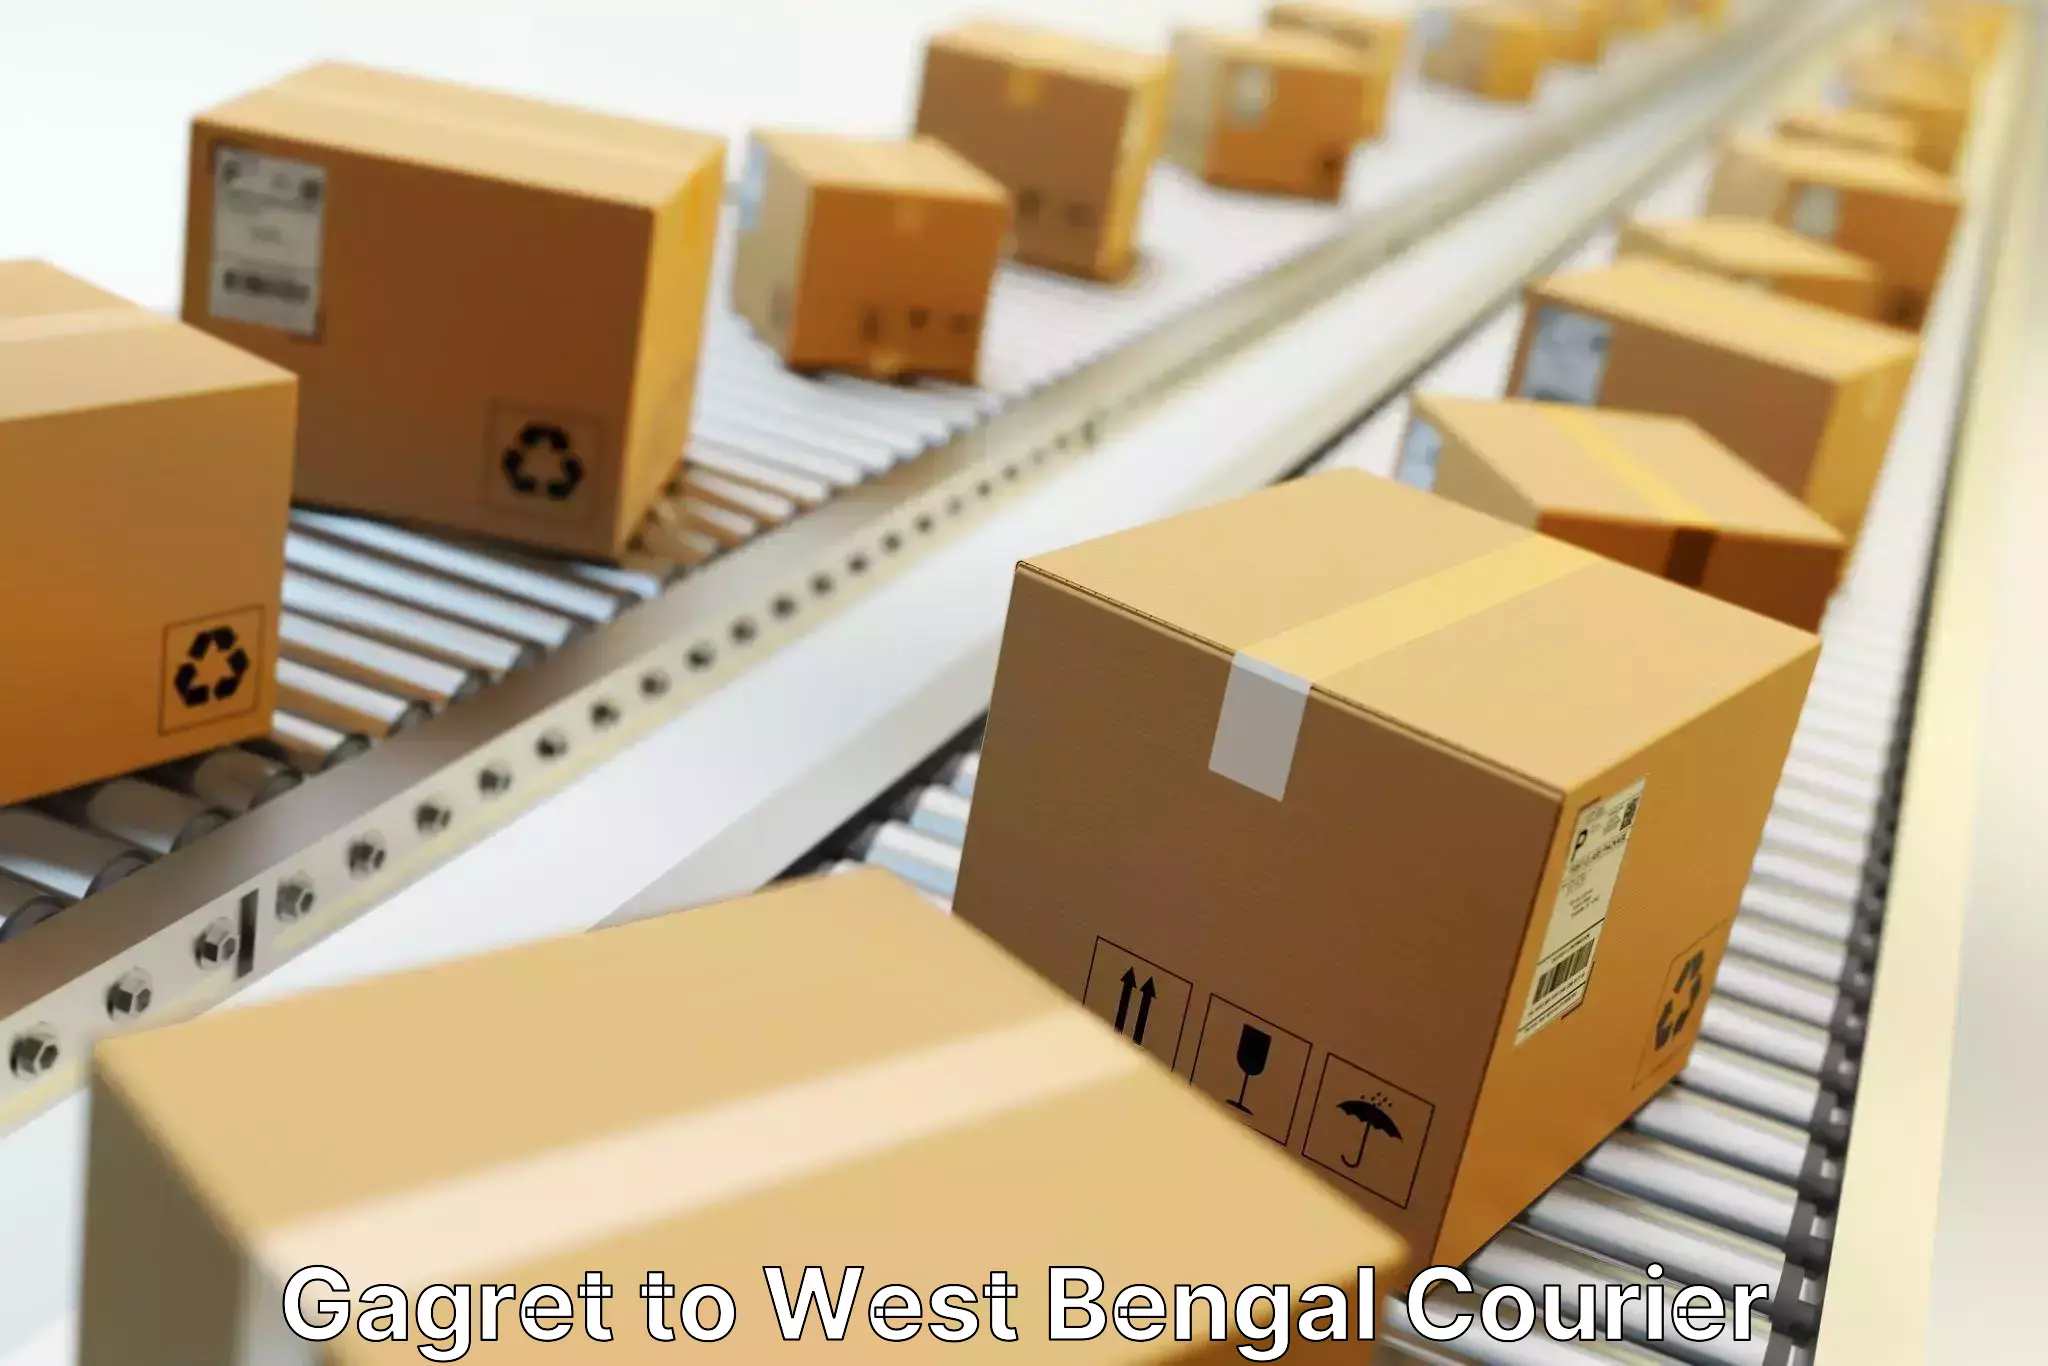 Full-service courier options Gagret to West Bengal